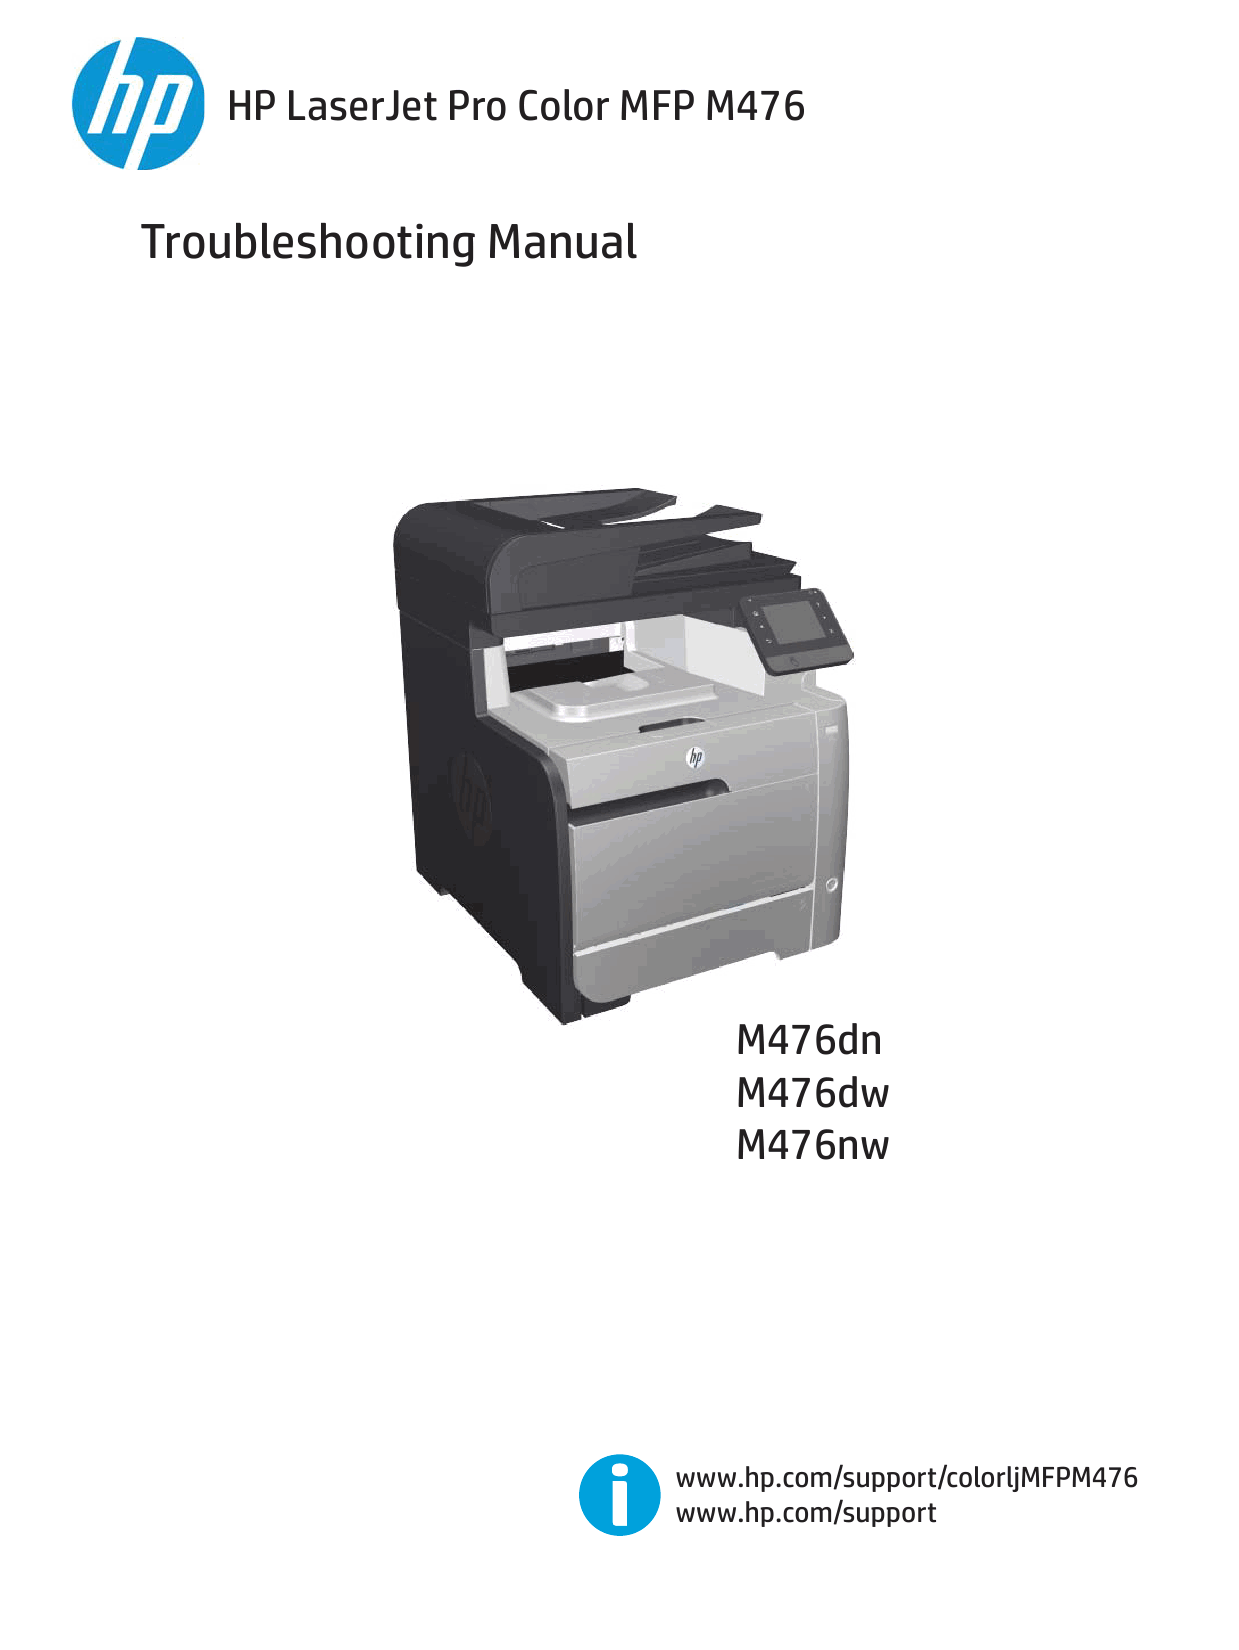 HP ColorLaserJet Pro-MFP M476 dn dw nw Troubleshooting Manual PDF download-1